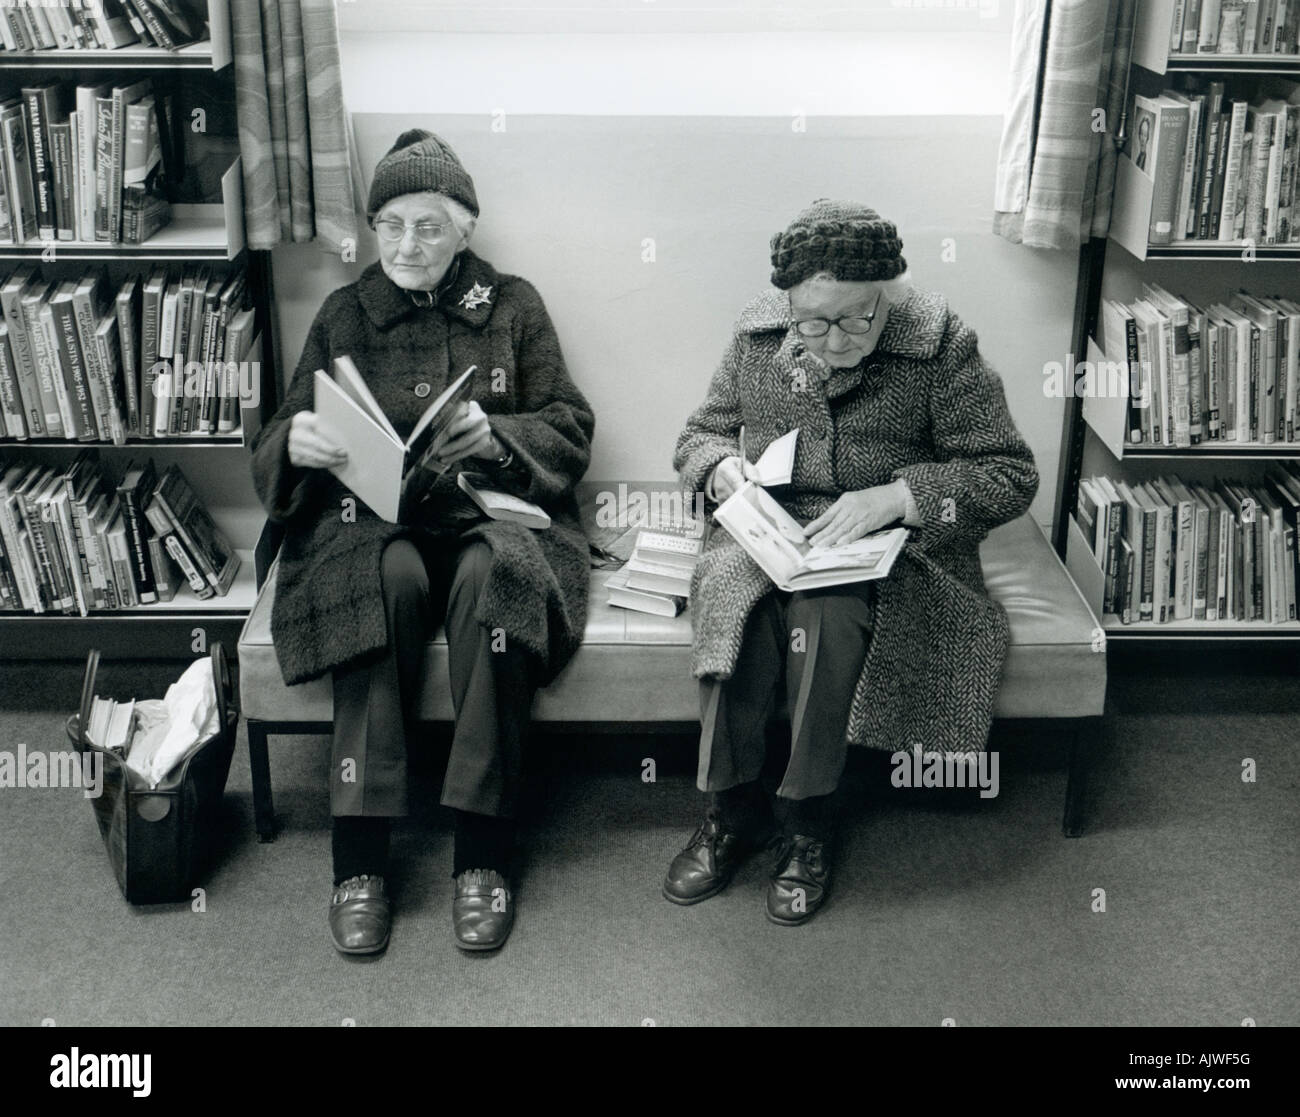 1980 scene of two women pensioners studying books in library, Malmesbury, UK. Stock Photo